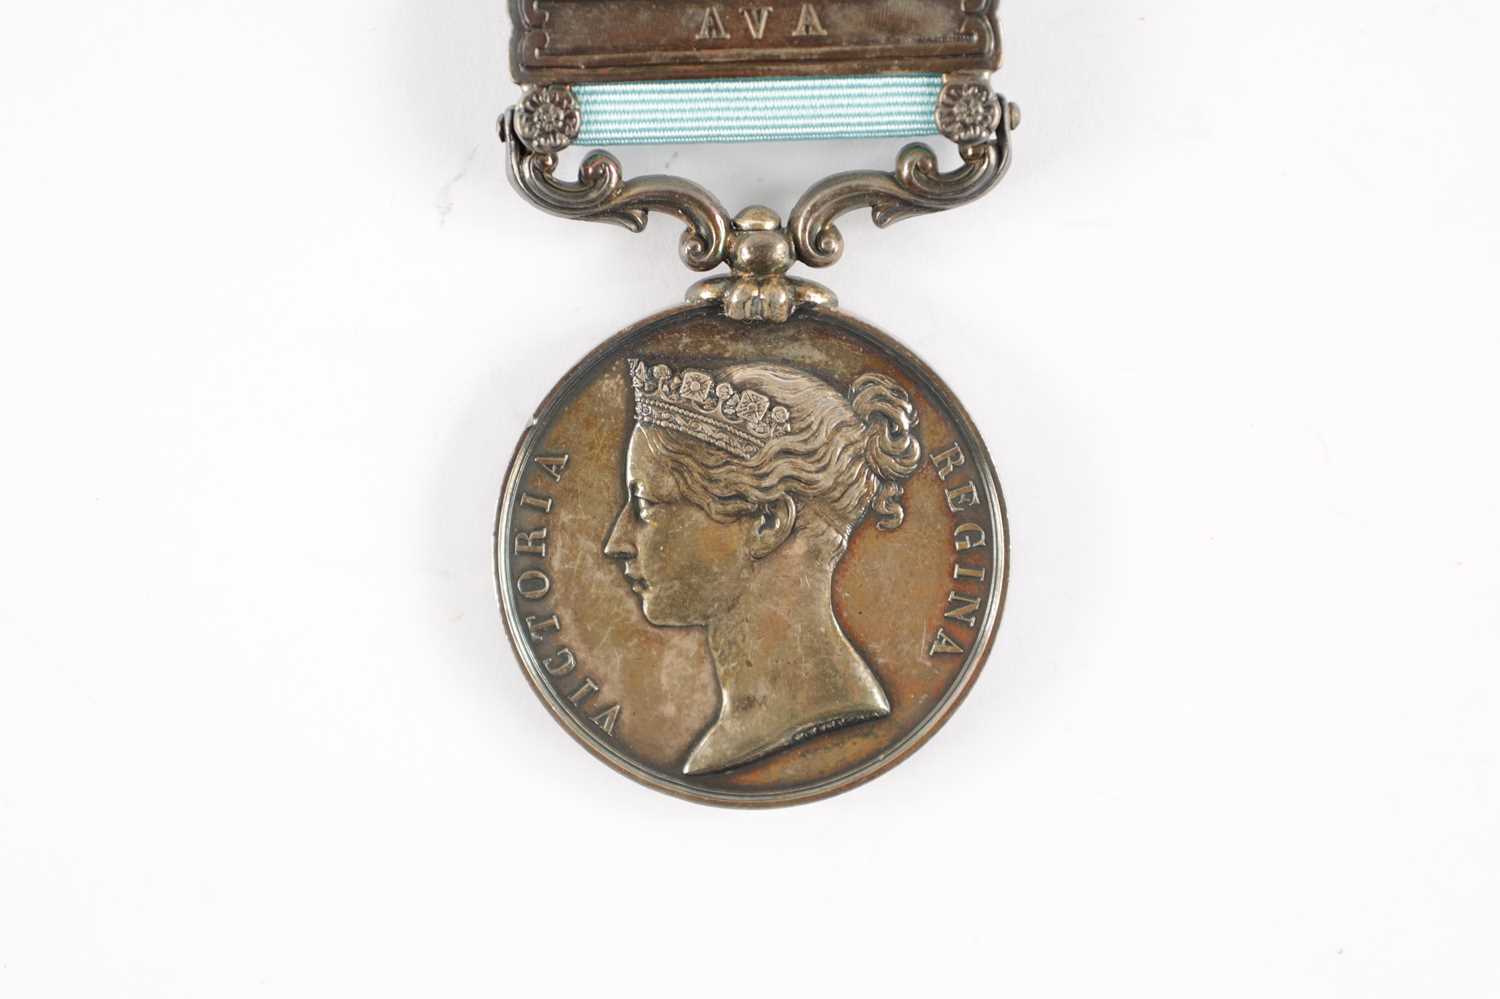 AN ARMY OF INDIA MEDAL 1799-1826, WITH ‘AVA’ CLASP - Image 2 of 7